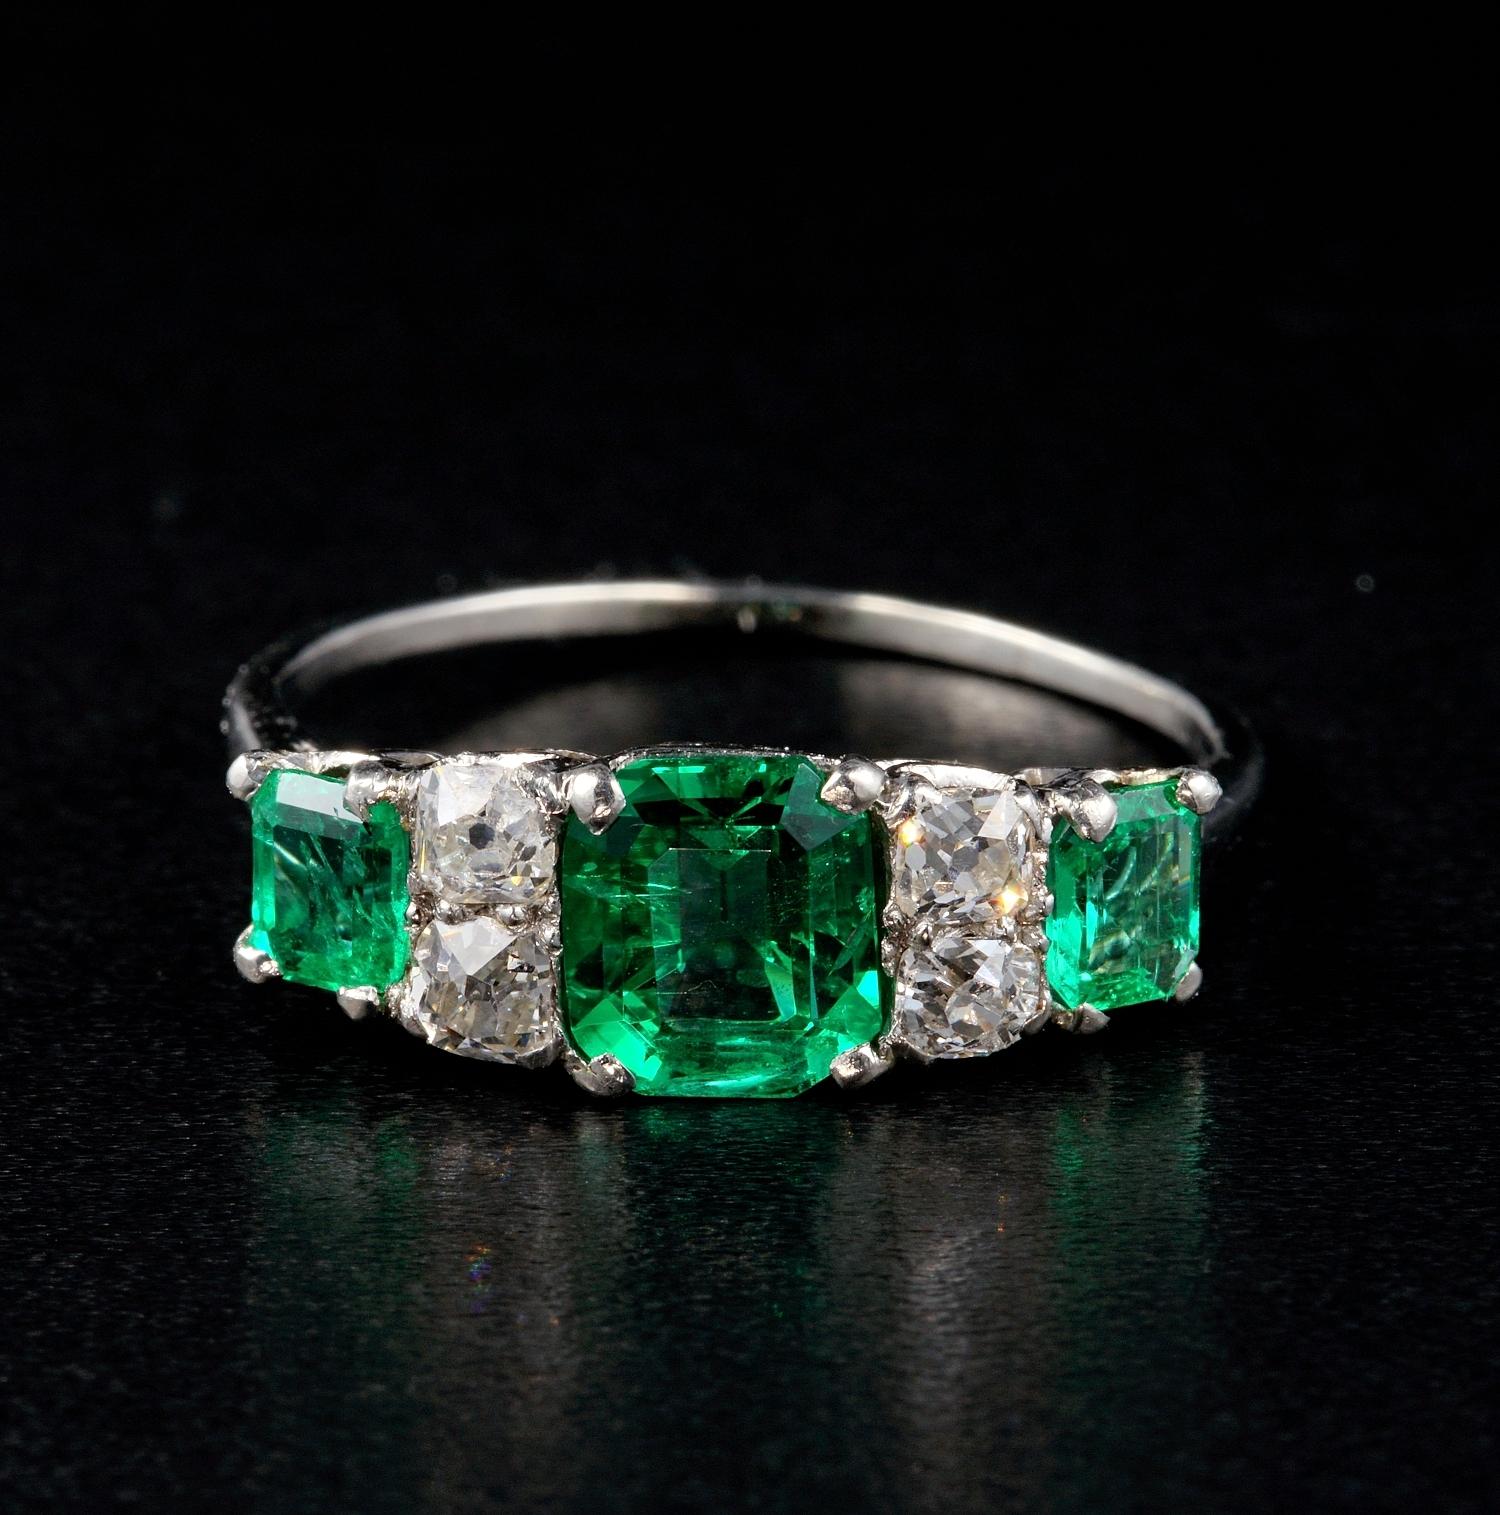 Rare Quality!

This exceptionally beautiful Art Deco Colombian Emerald and Diamond trilogy ring is quality at peak!

1920 ca all crafted of solid Platinum boasts a selection of Rare Emeralds being Colombian origin, with the main Emerald set in the